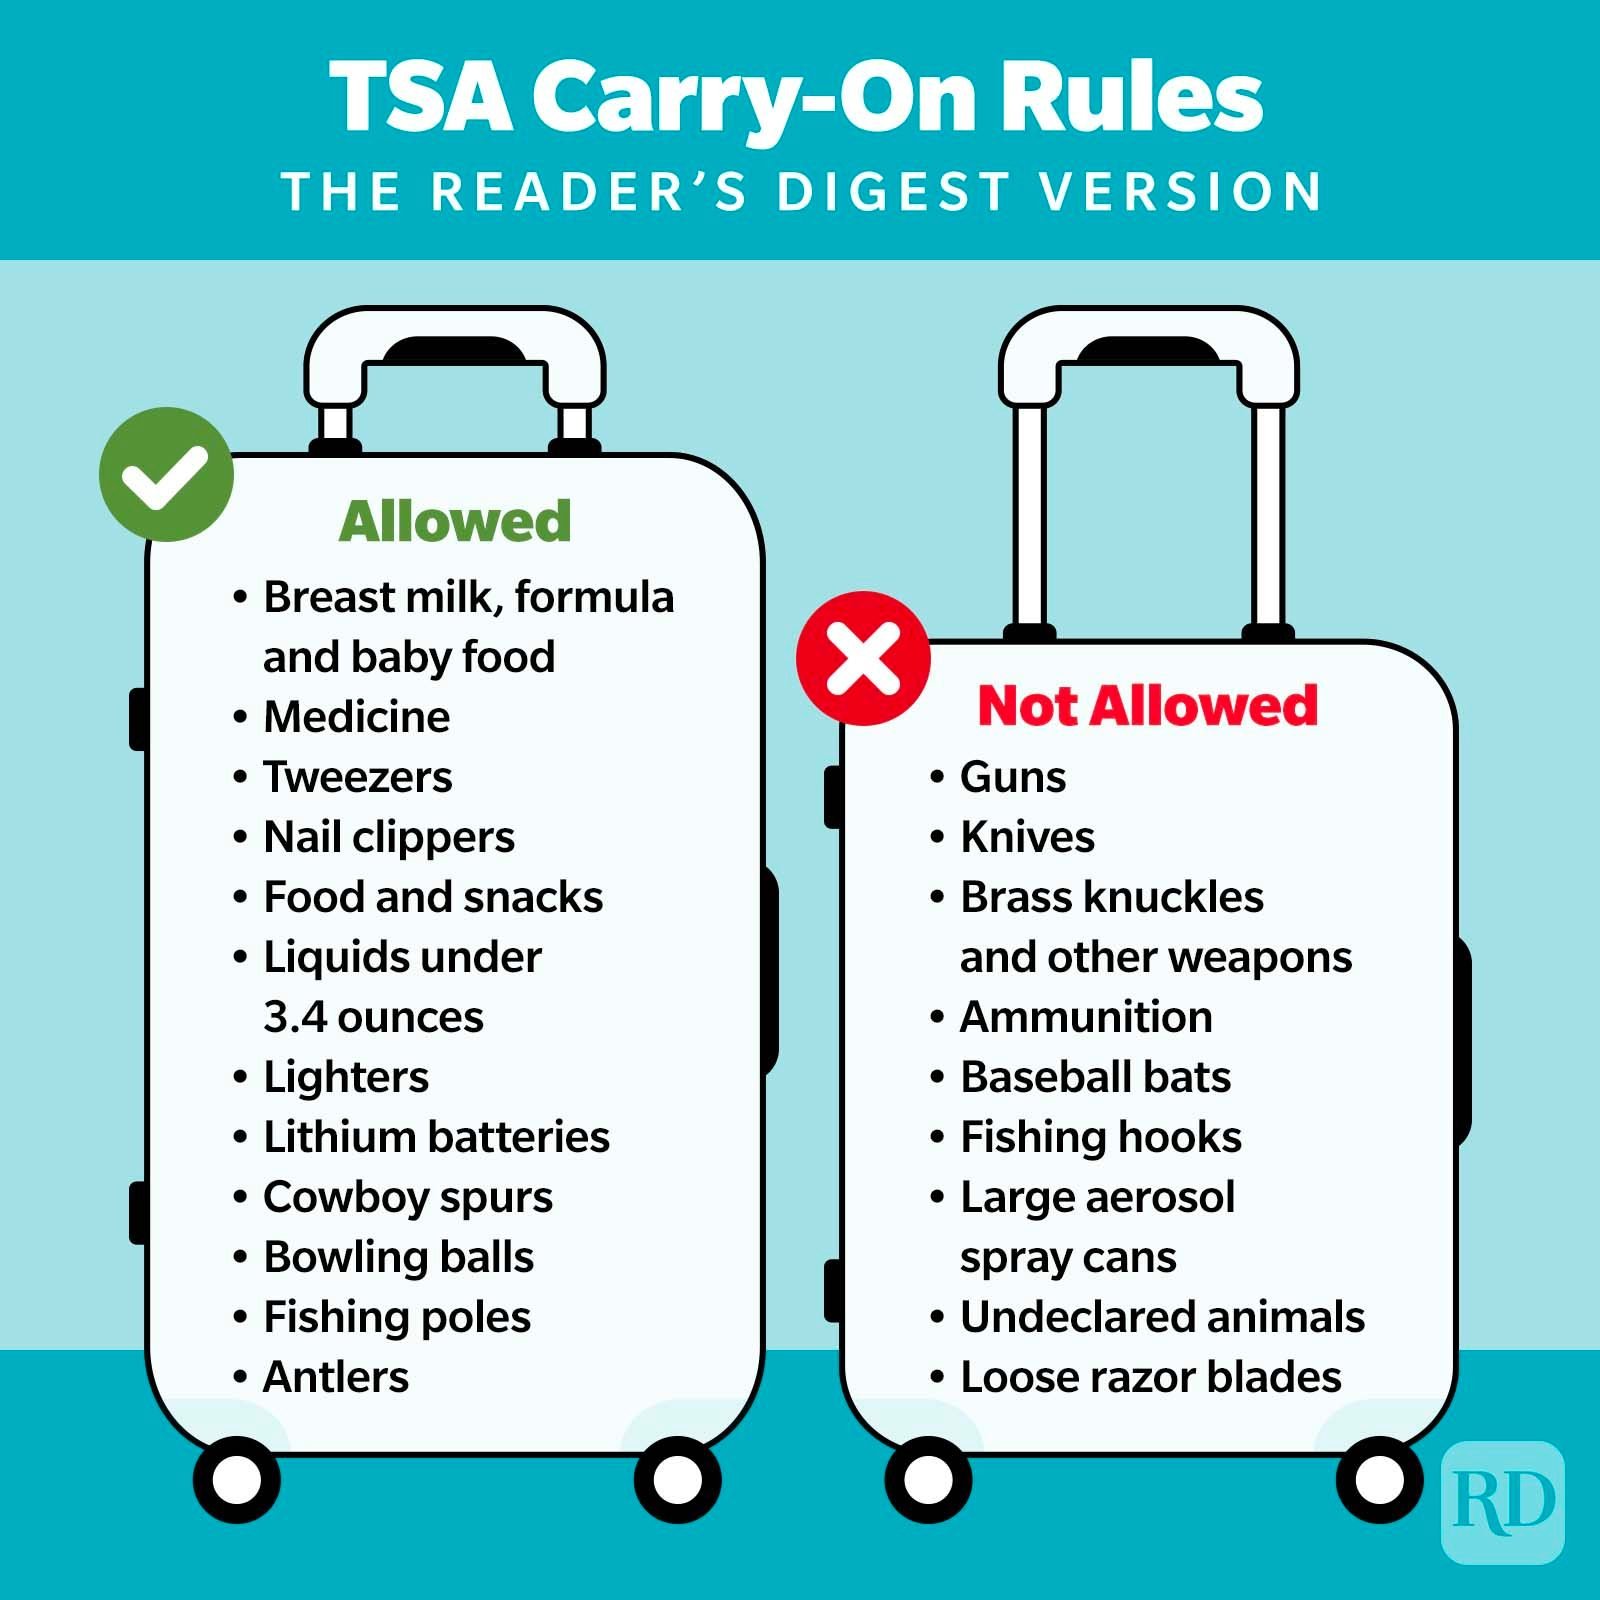 https://www.rd.com/wp-content/uploads/2022/08/TSA-Carry-On-Rules-Infographic-GettyImages-1370947042.jpg?fit=680%2C680